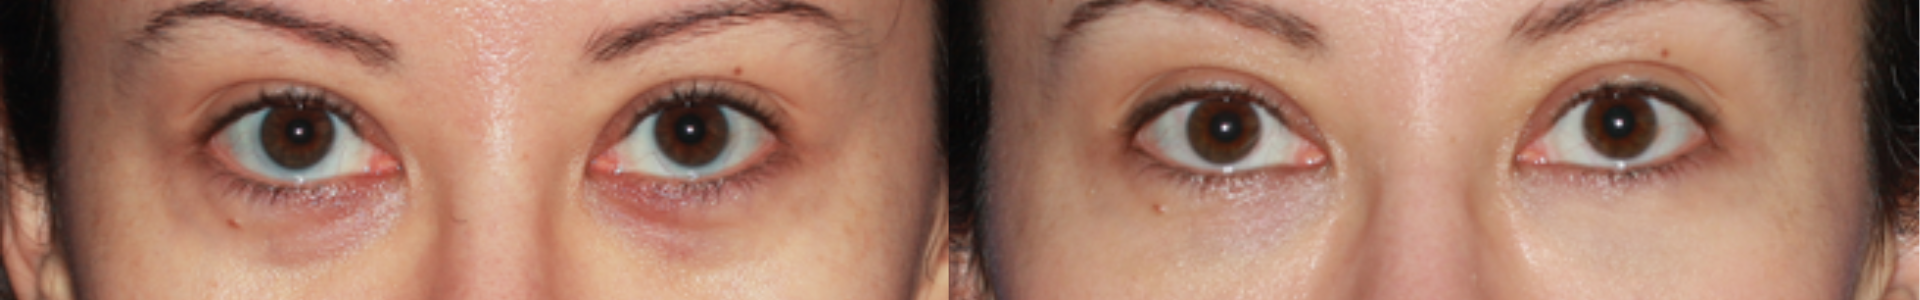 Female patient's before-and-after photos of Belotero treatment.